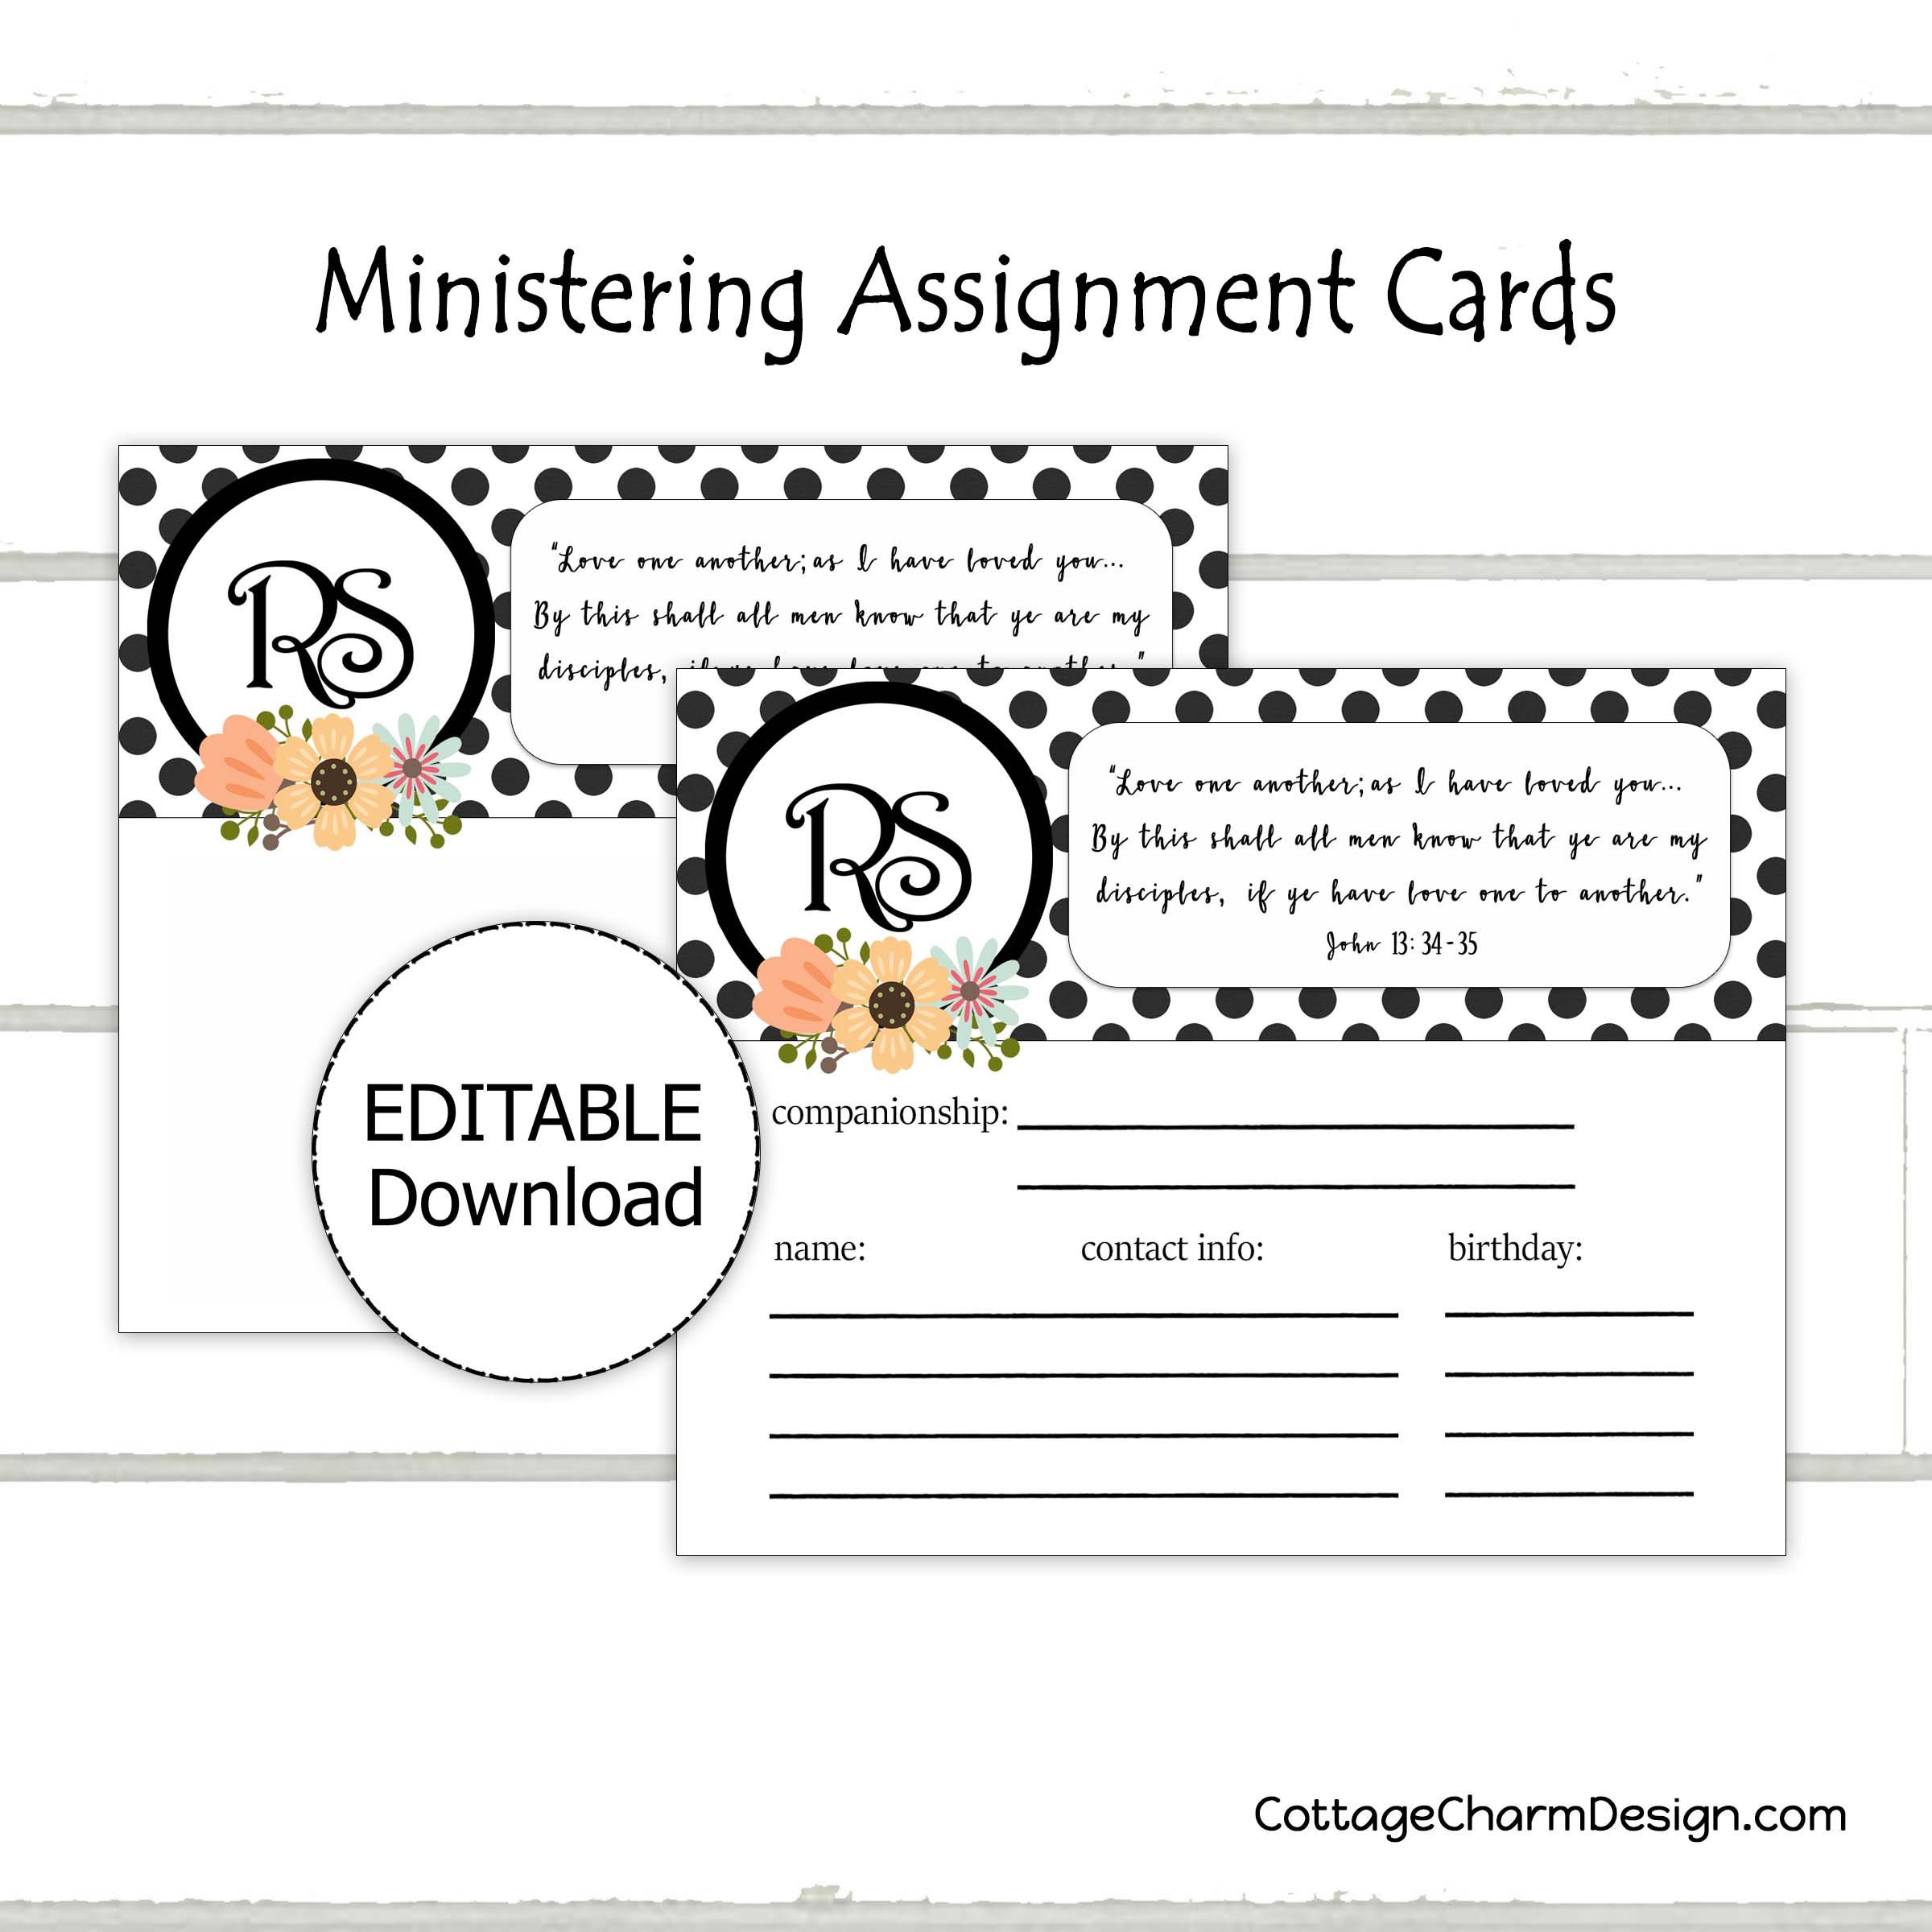 Ministering Assignment Card Editable Printable Etsy